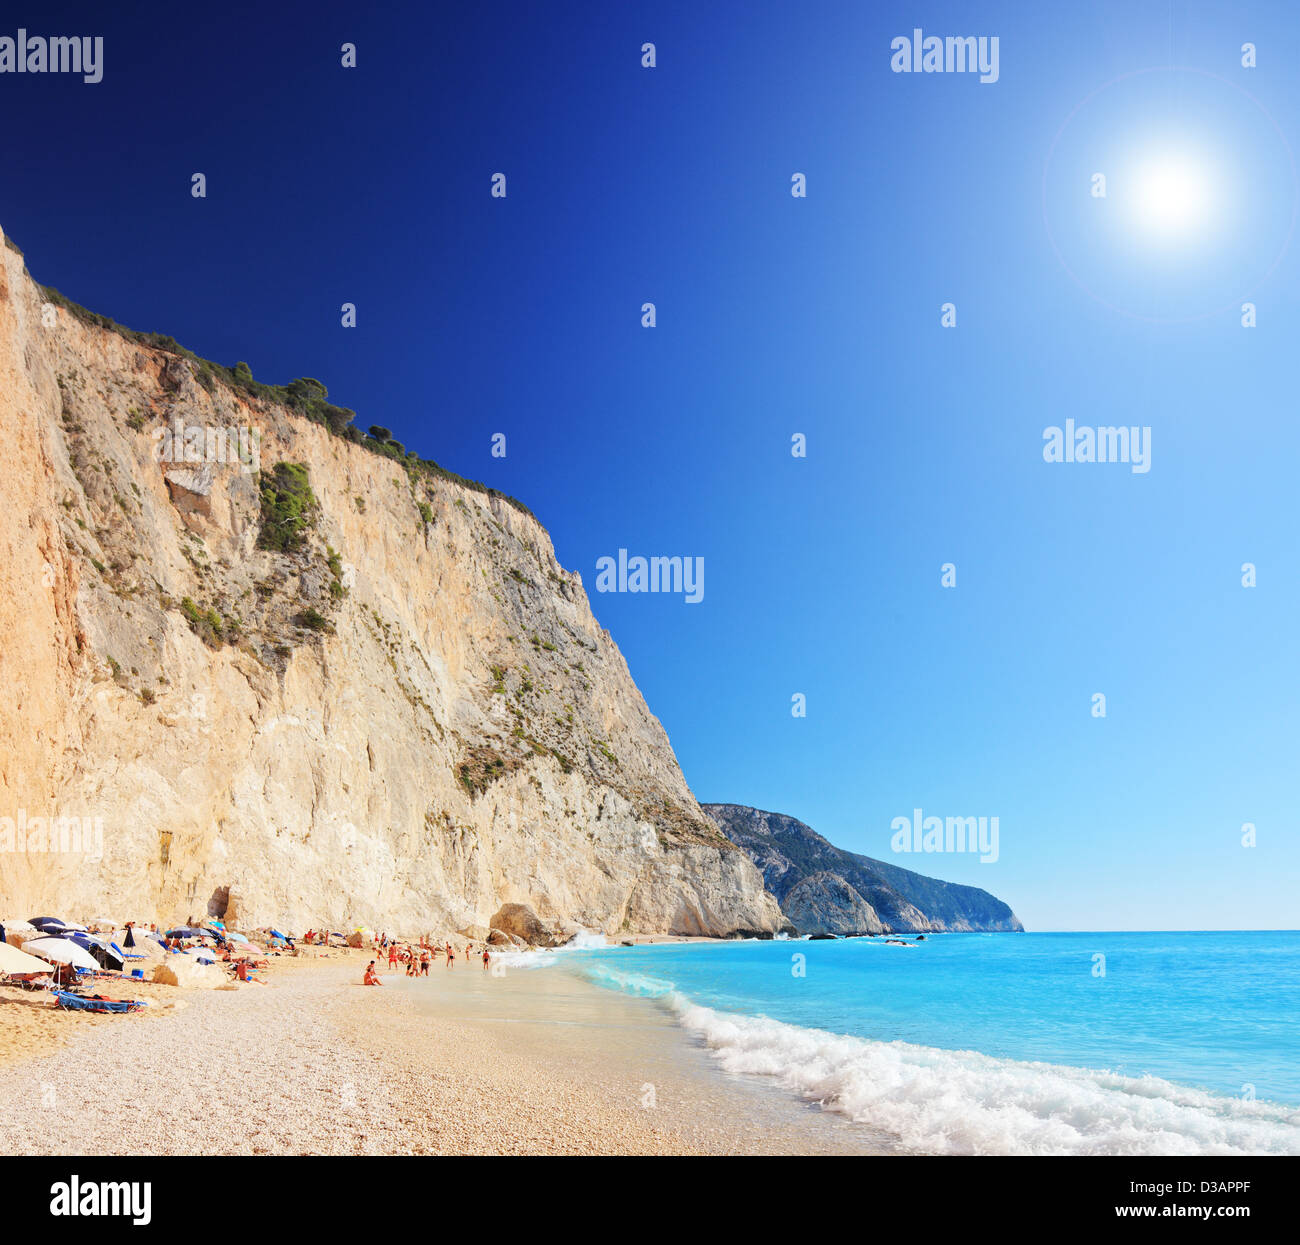 A view of a Porto Katsiki beach on a clear sunny day, Greece, shot with a tilt and shift lens Stock Photo